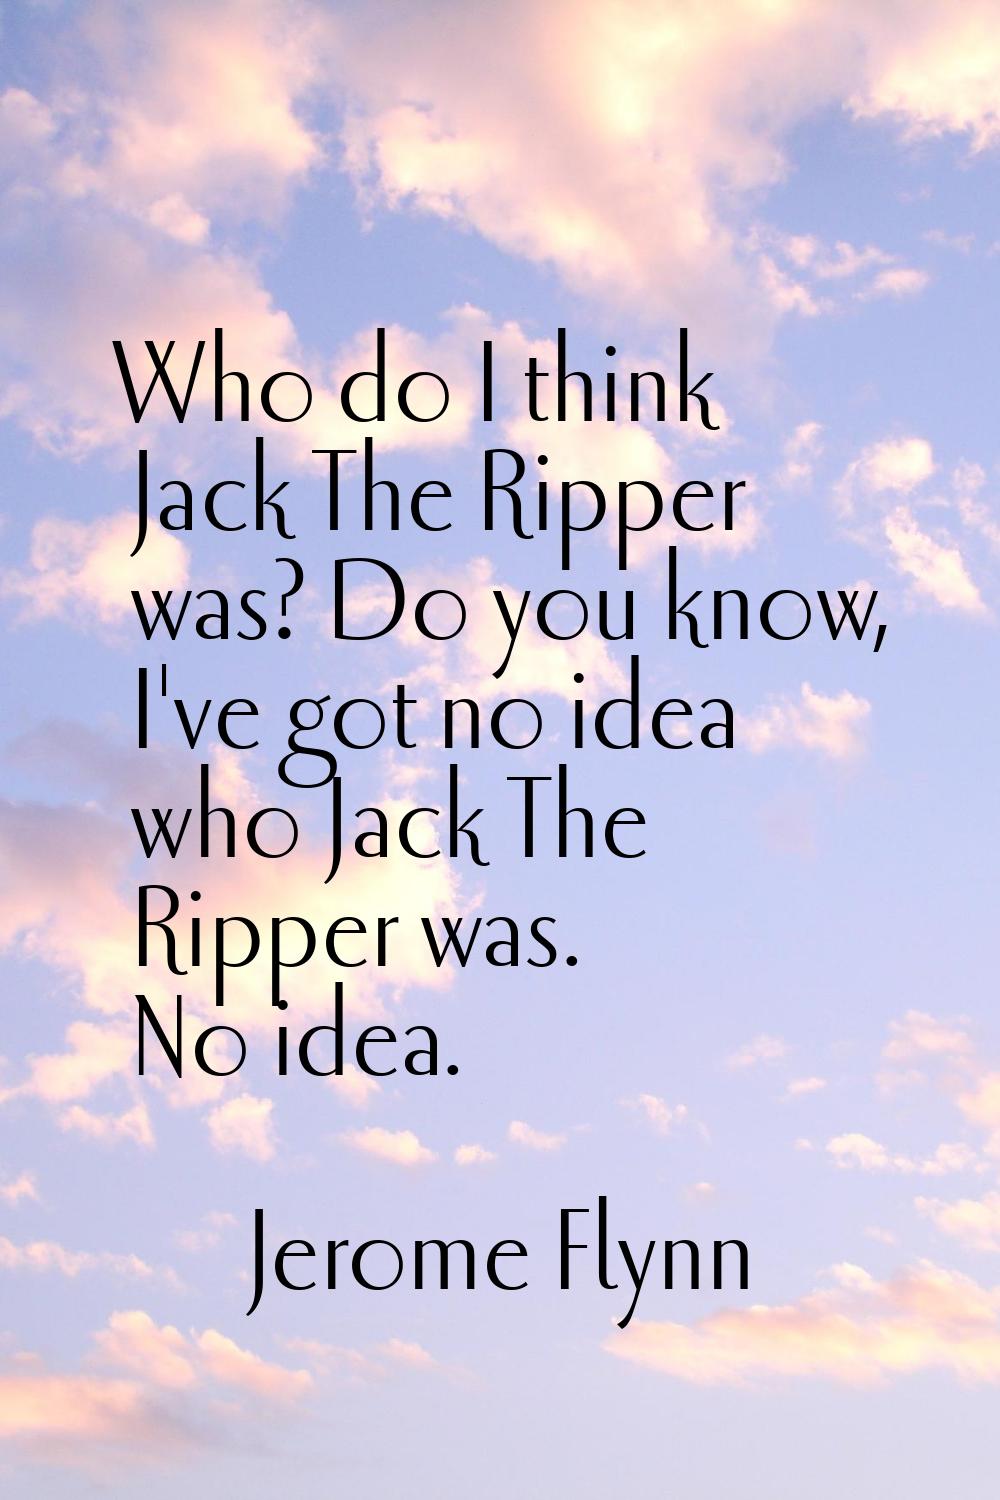 Who do I think Jack The Ripper was? Do you know, I've got no idea who Jack The Ripper was. No idea.